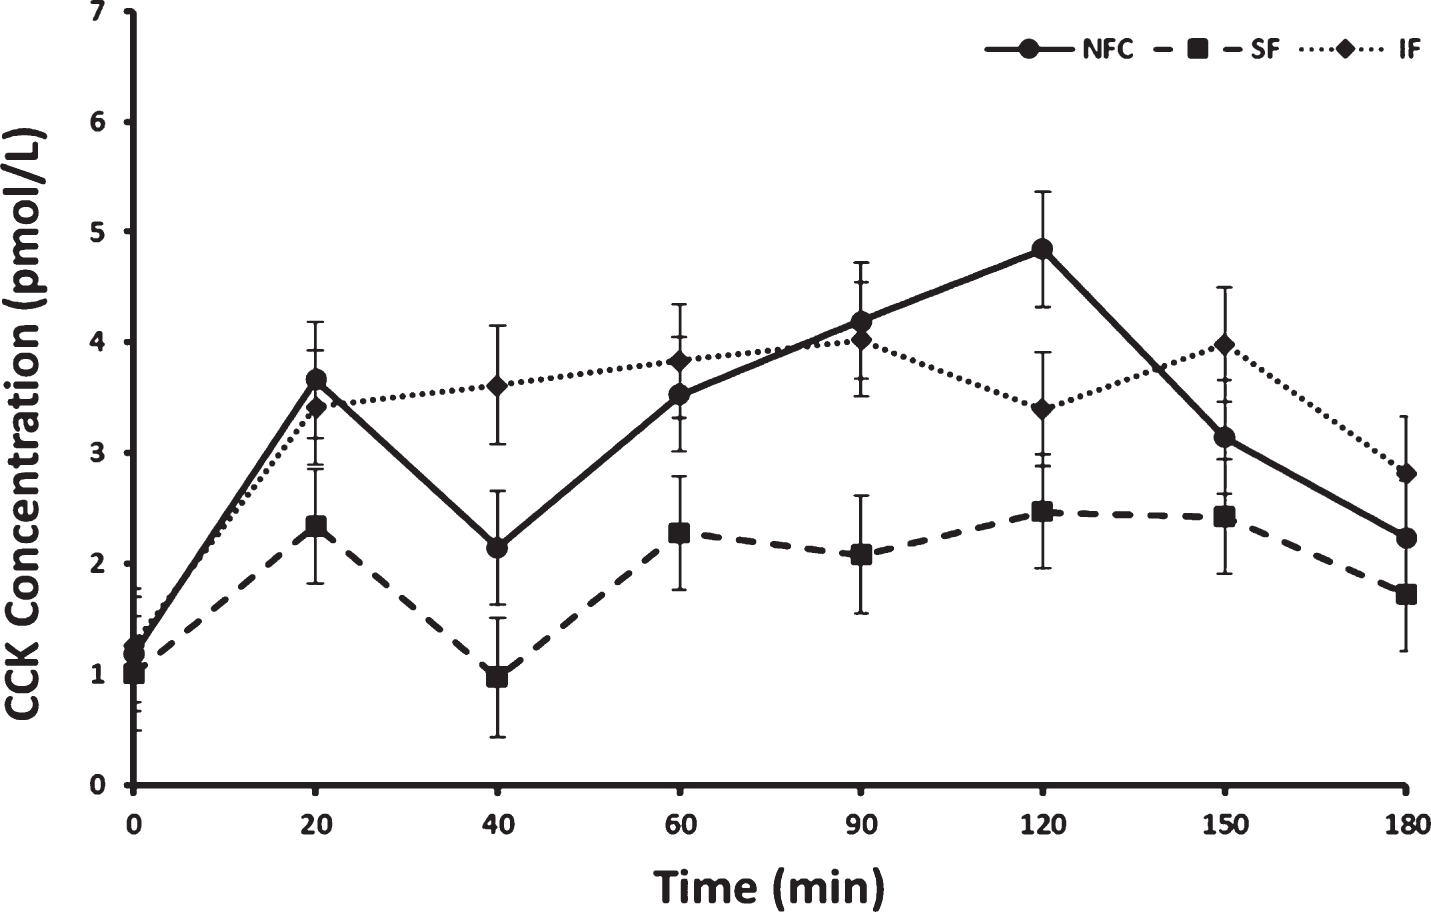 Cholecystokinin (CCK) variation in response to consumption of NFC-No Fiber Control, IF-Insoluble Fiber, SF-Soluble Fiber meals in all women (n = 17). Values are the means±SEM at each time point. Different letters at the same time point denotes significant difference, p < 0.05.